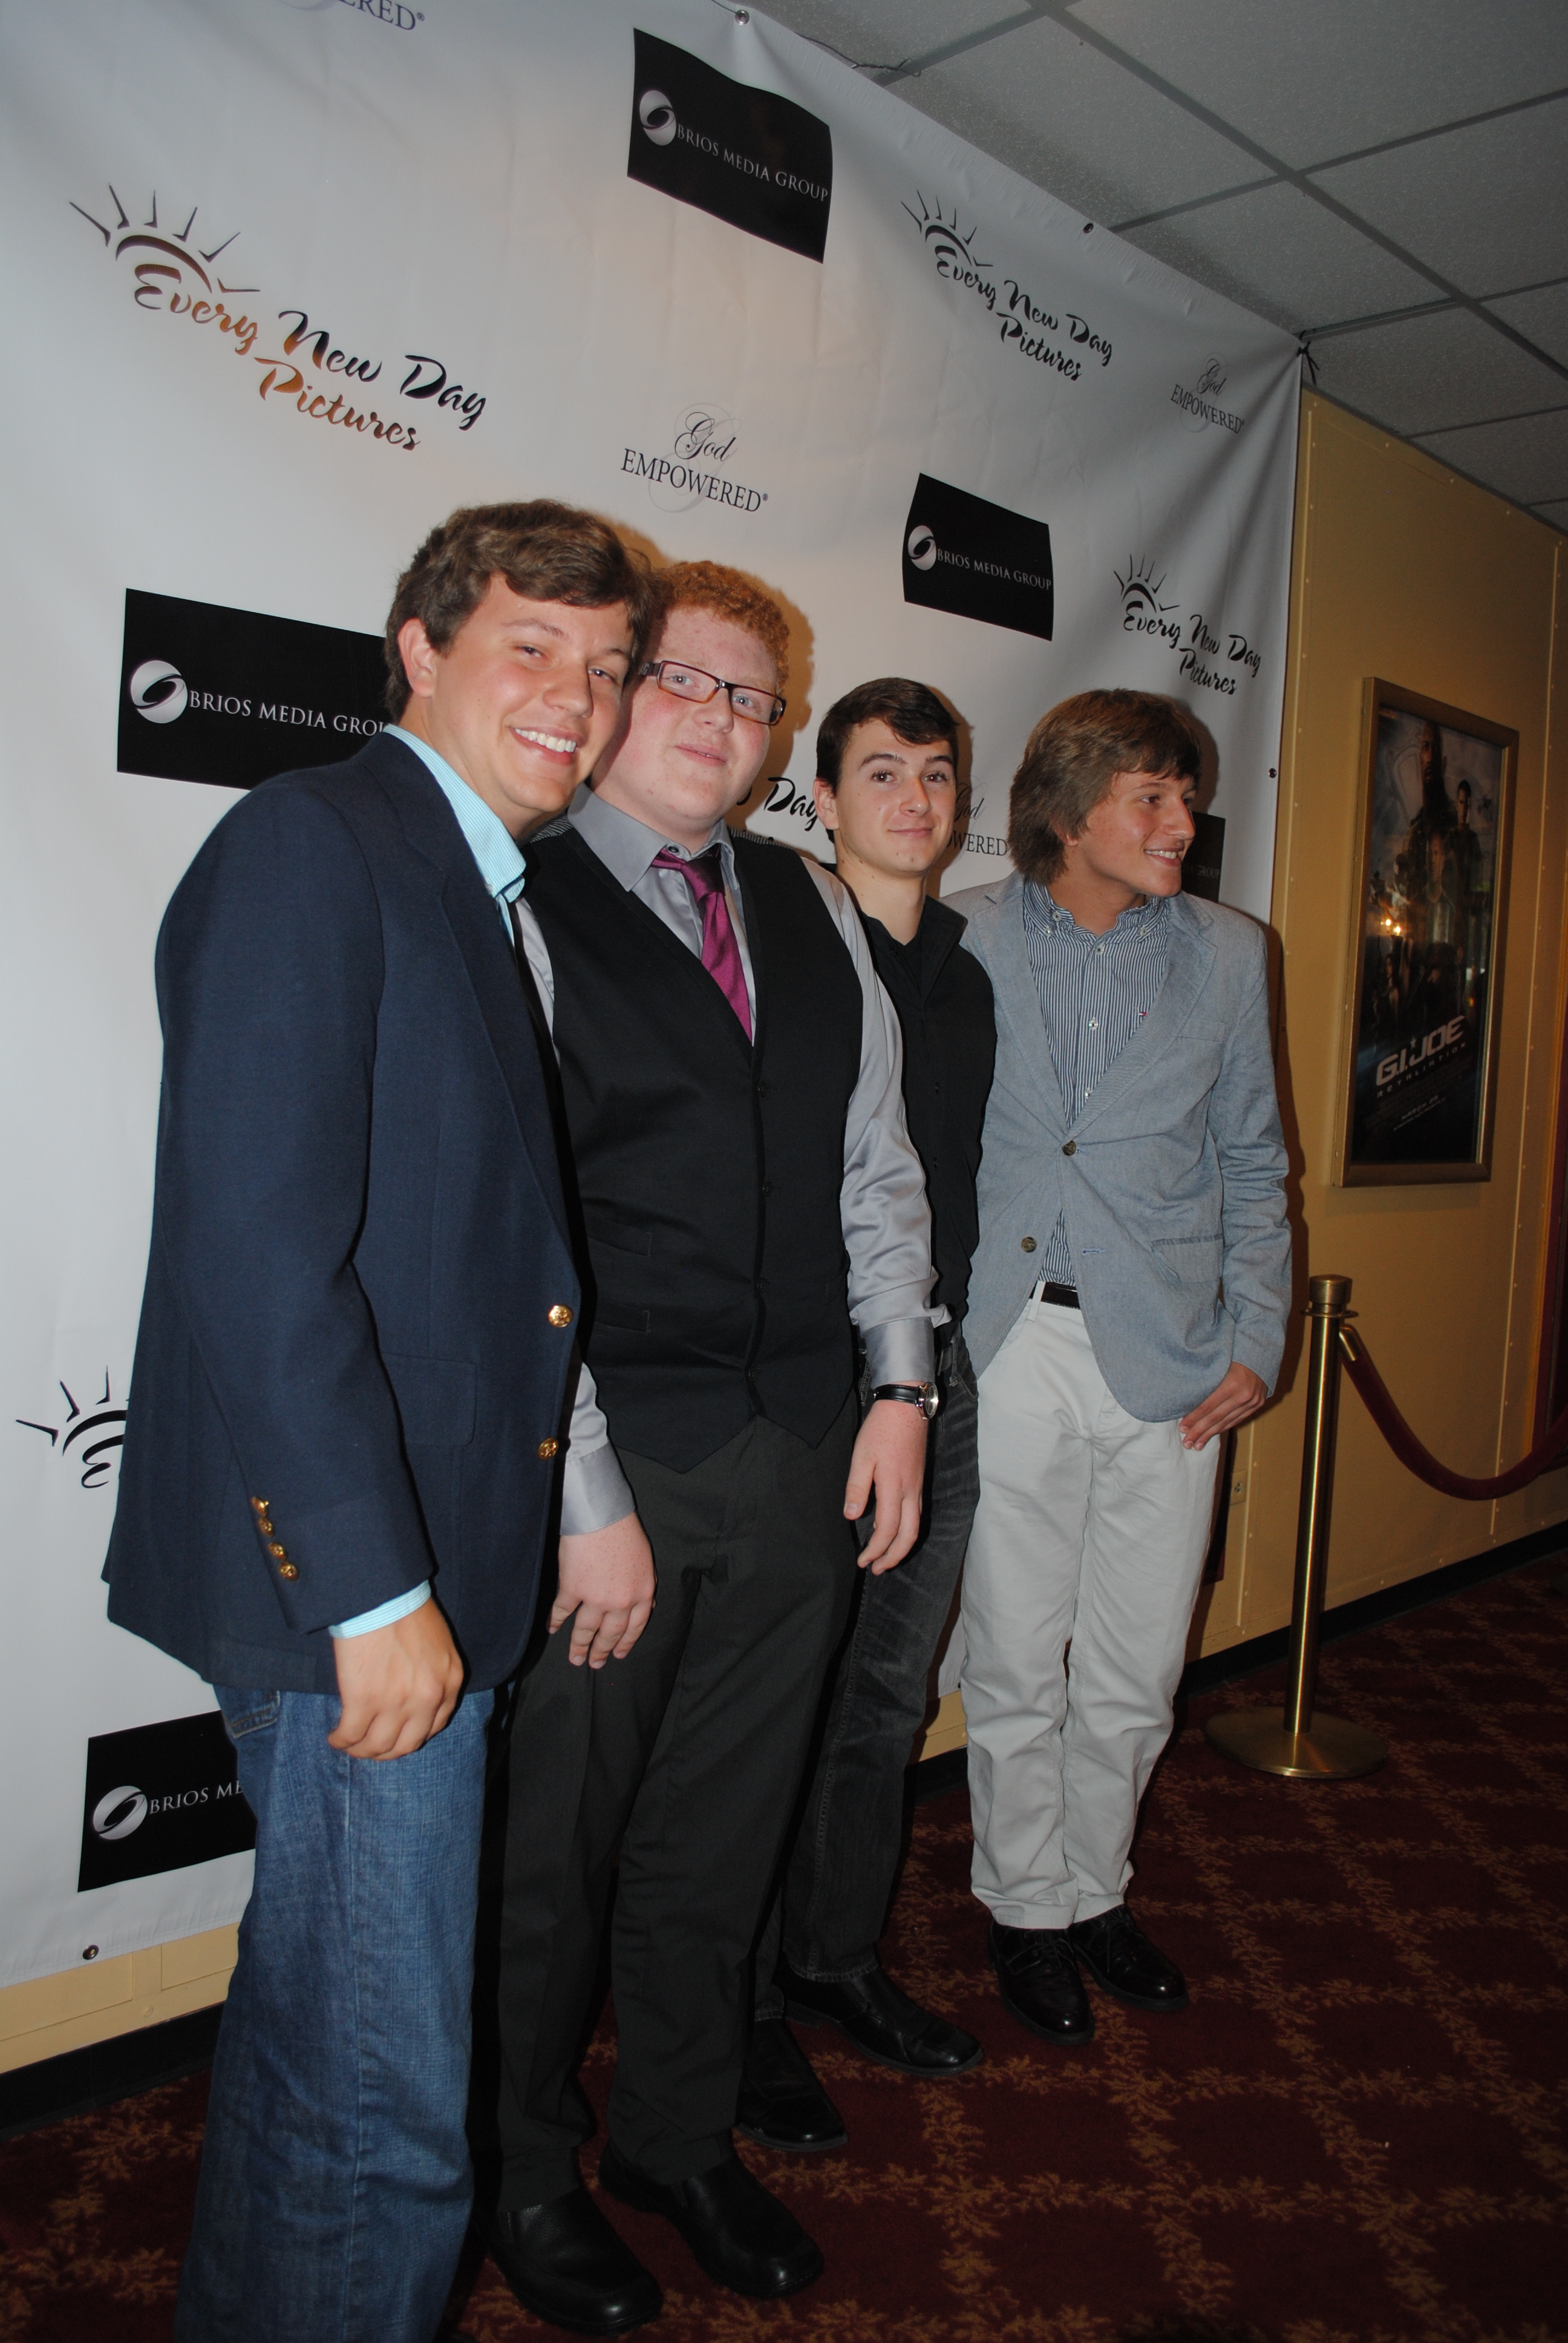 (Ryan)Ryan Williams, Cameron Atkins (Luke Ptacek), Drew Williams (Voltaire Council) and Jessie (Andrew Williams) at the Premiere of 